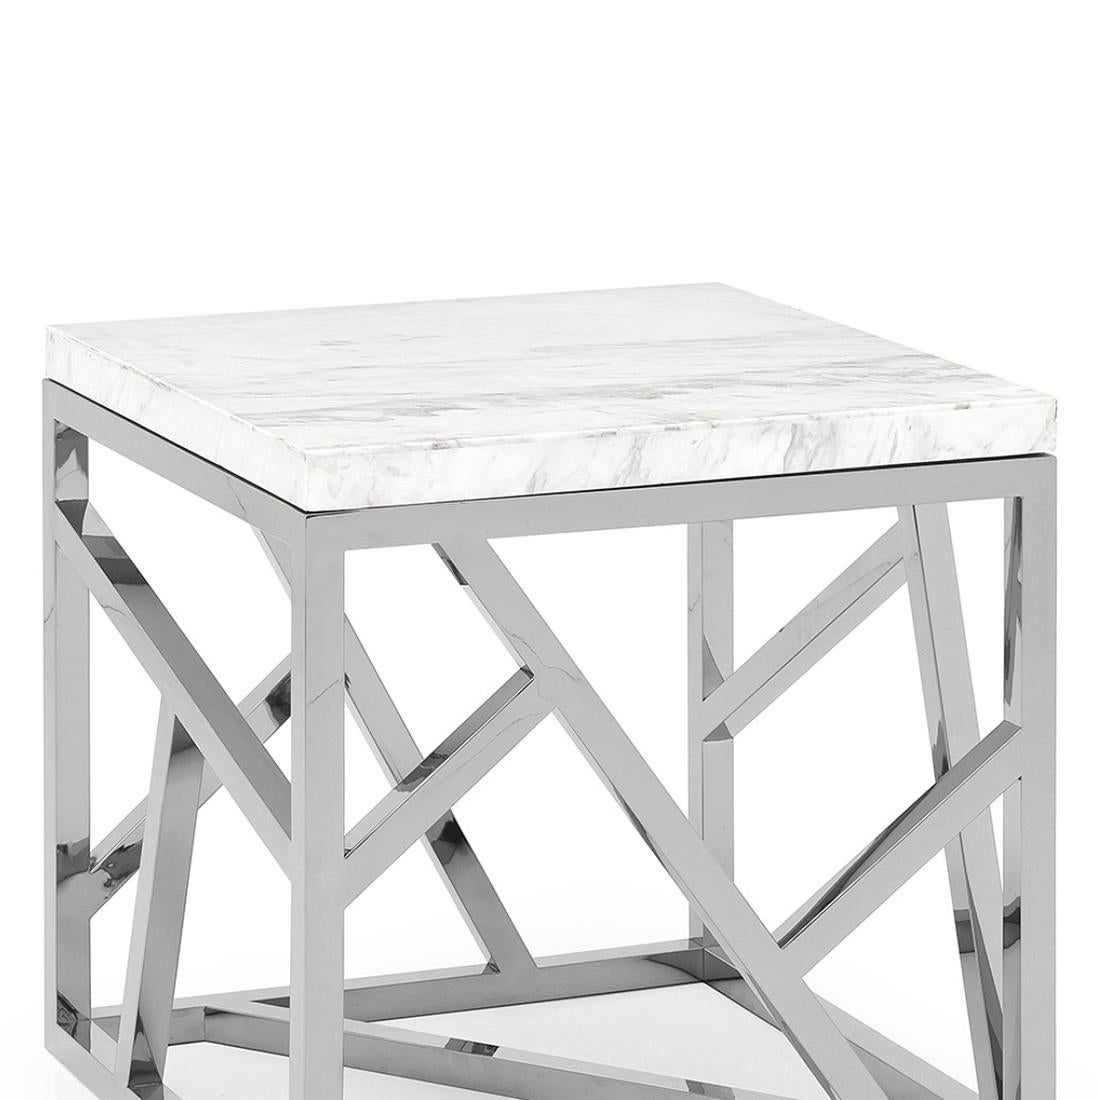 Side table Raytona chrome with metal base
in chrome finish and with white marble top.